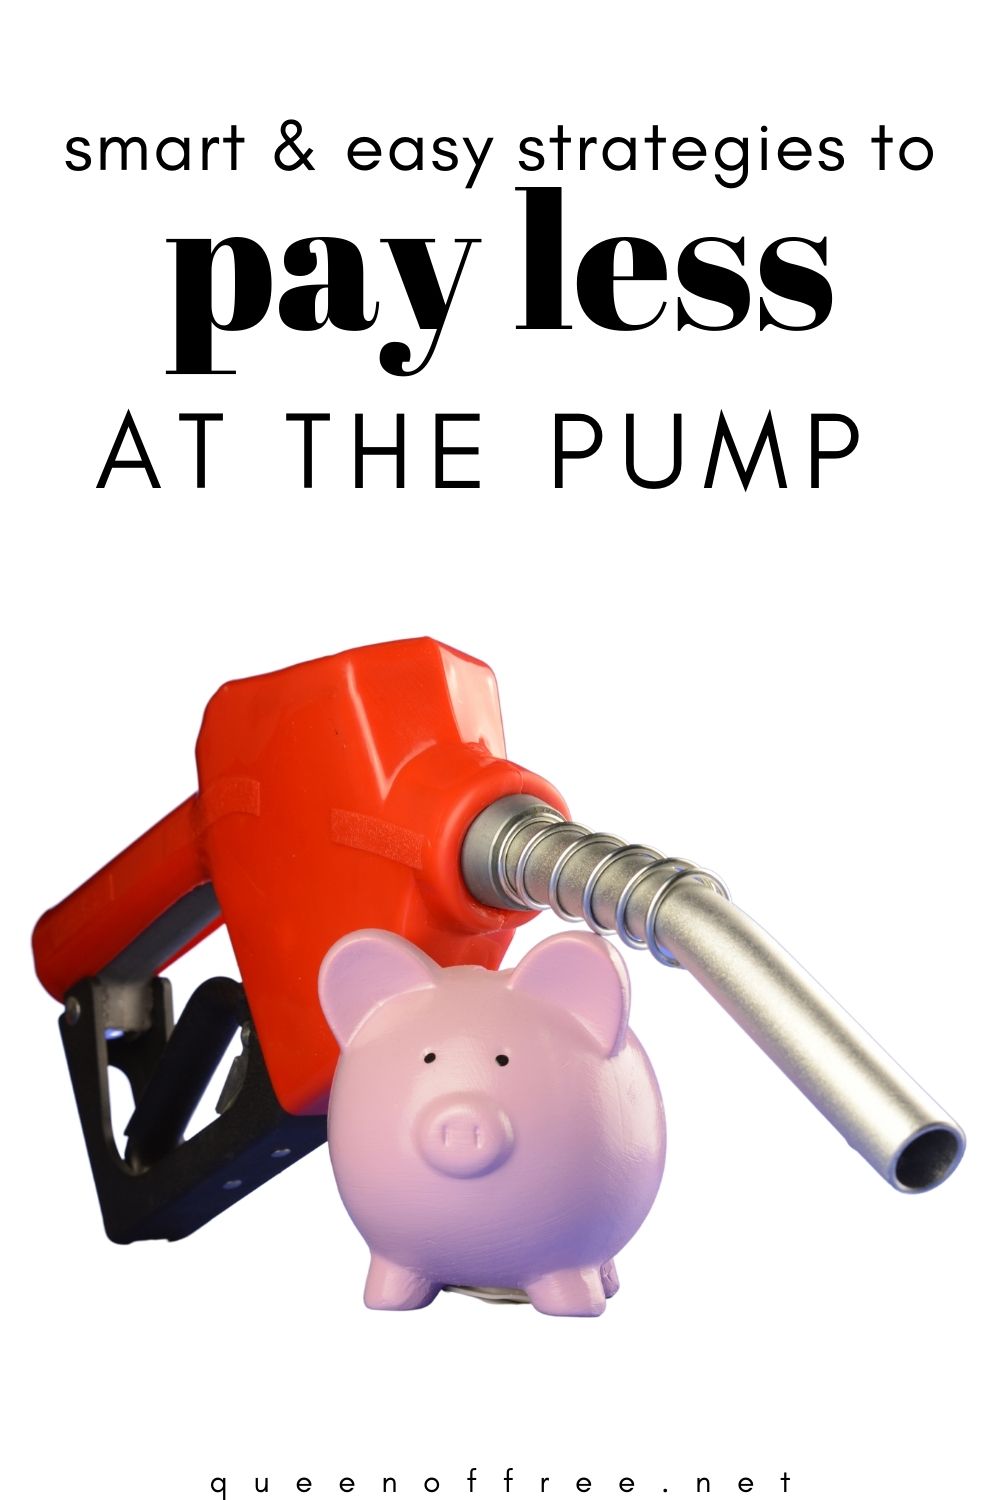 Everyone is feeling the pain at the pump. But saving money on gas doesn't have to be hard. These simple strategies add up over time!